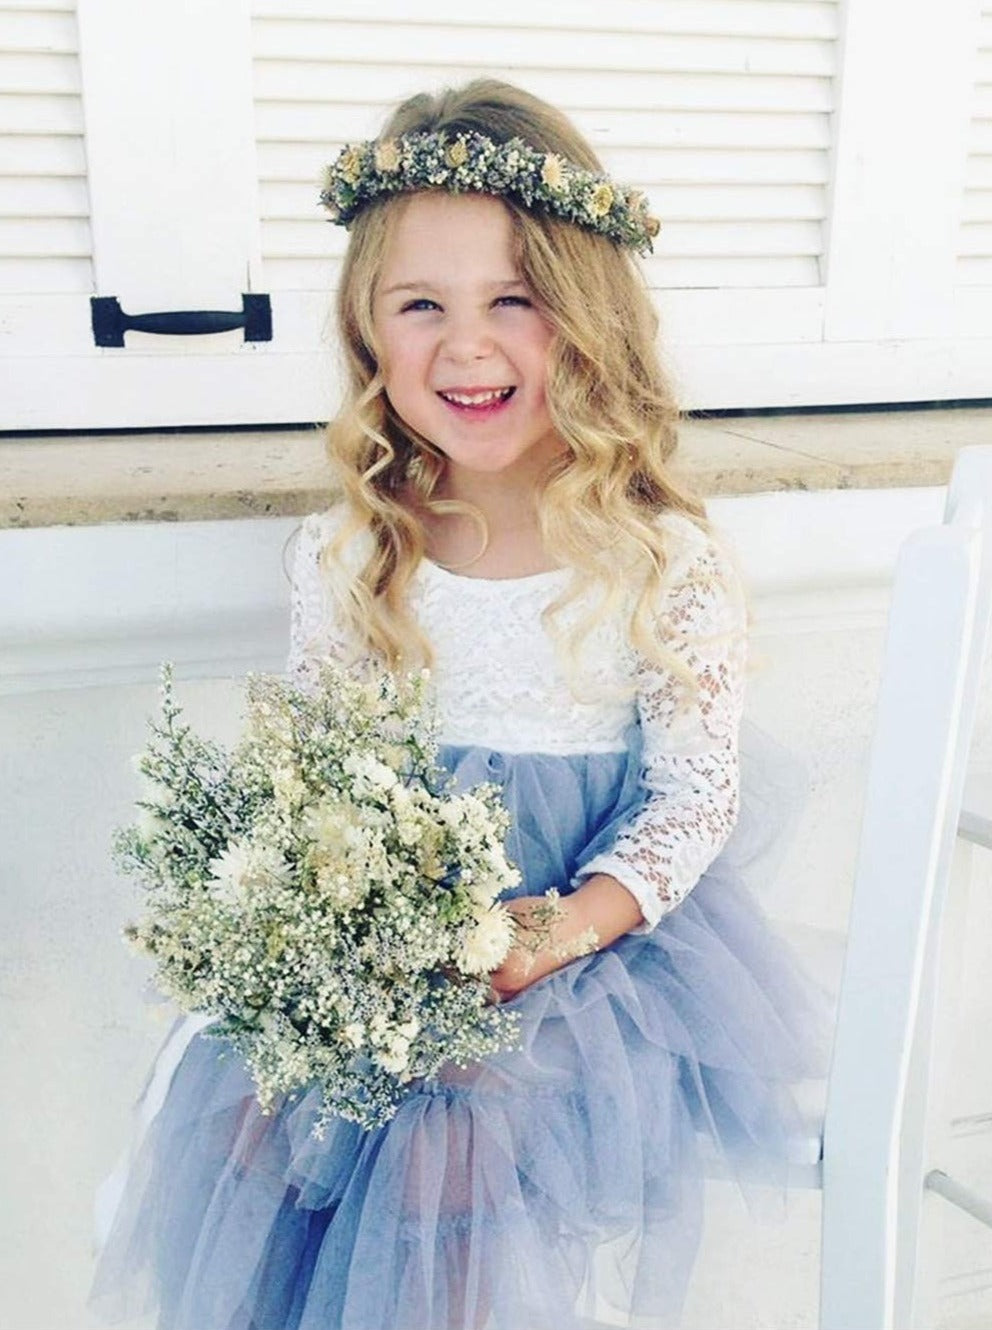 2Bunnies Flower Girl Dress Peony Lace Back A-Line Long Sleeve Tiered Tulle Short (Bluish Gray) - 2BUNNIES